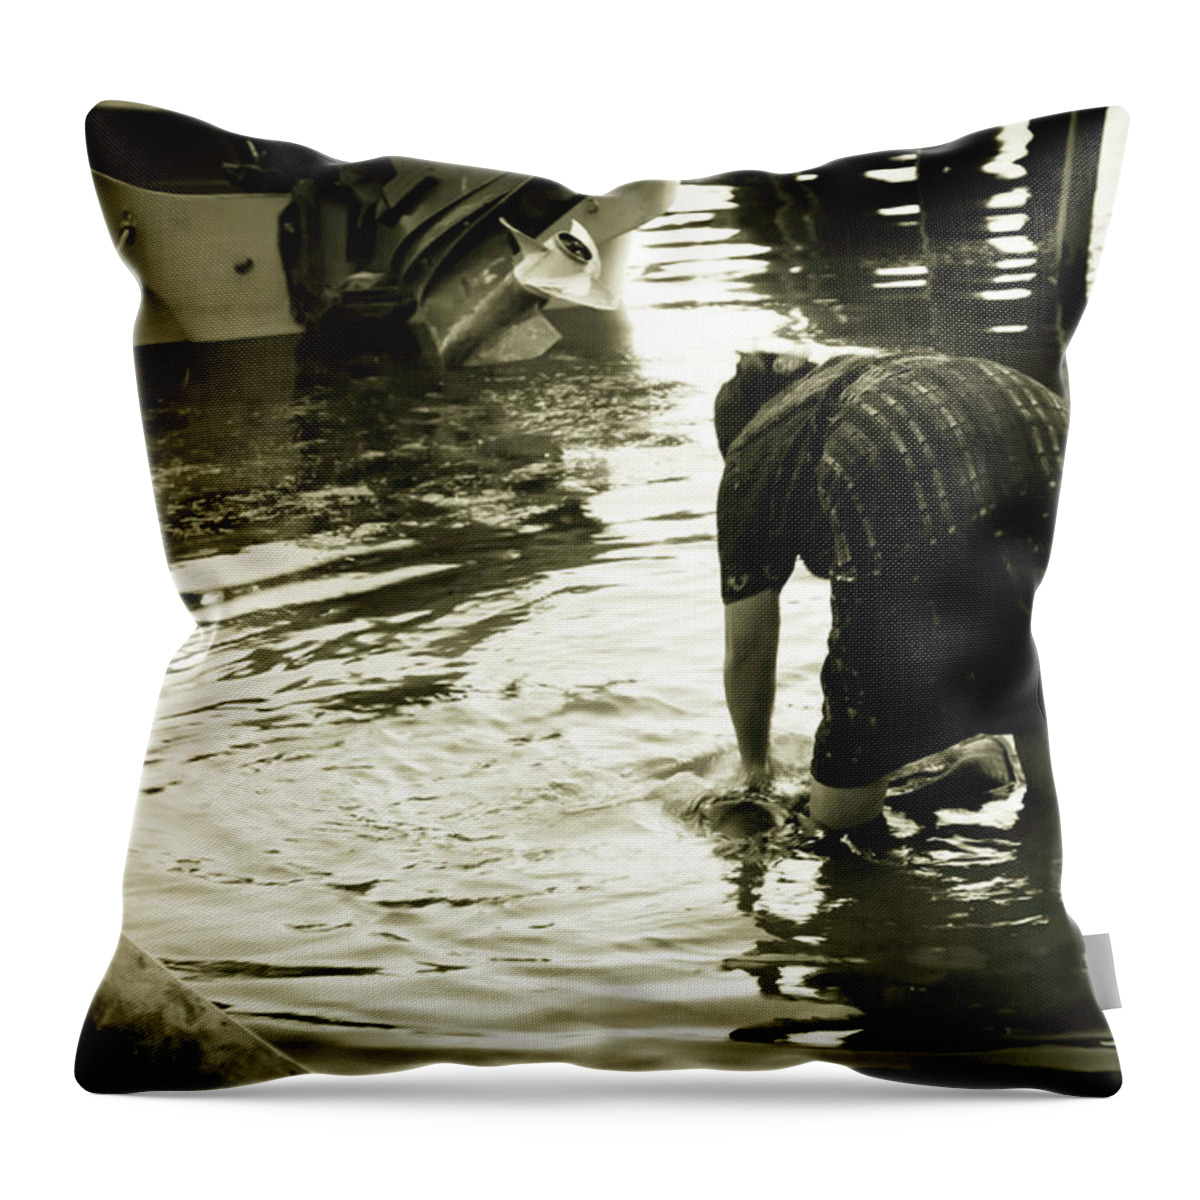 Eco Laundry Throw Pillow featuring the photograph Eco Laundry in Panajachel, Guatemala by Tatiana Travelways